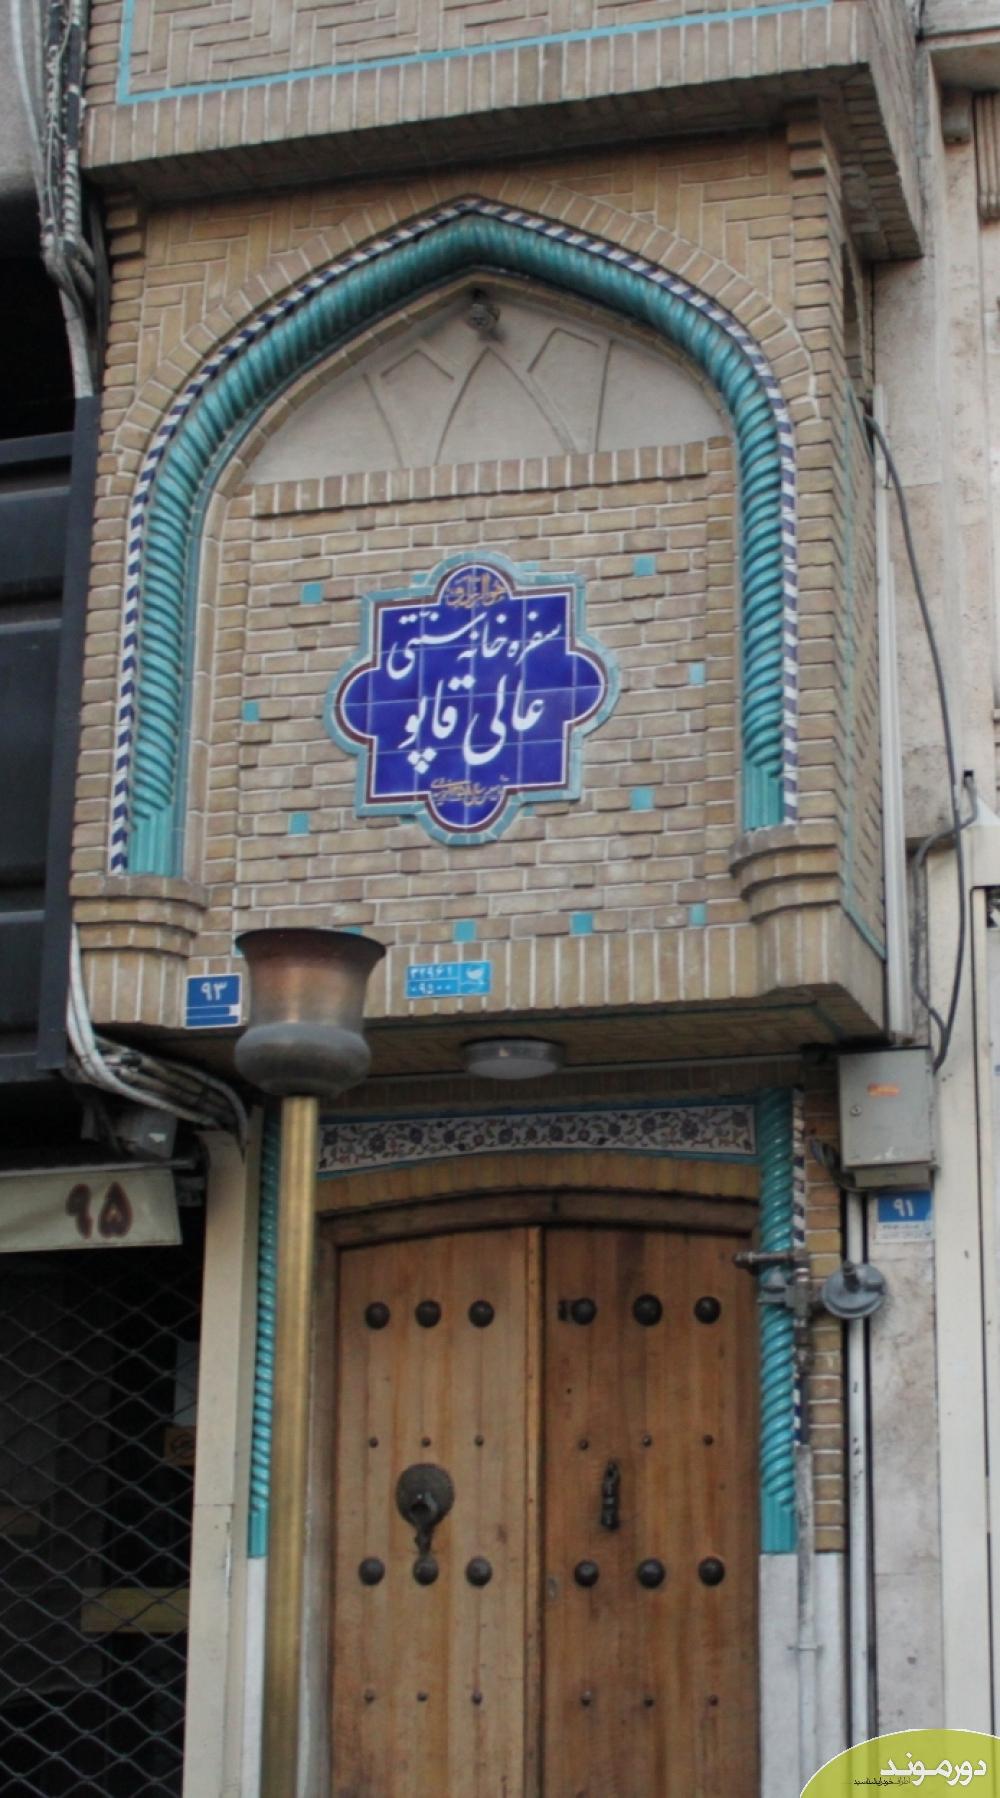 Cover image of this place Alighapoo Restaurant | رستوران سنتی عالی قاپو (رستوران سنتی عالی قاپو)